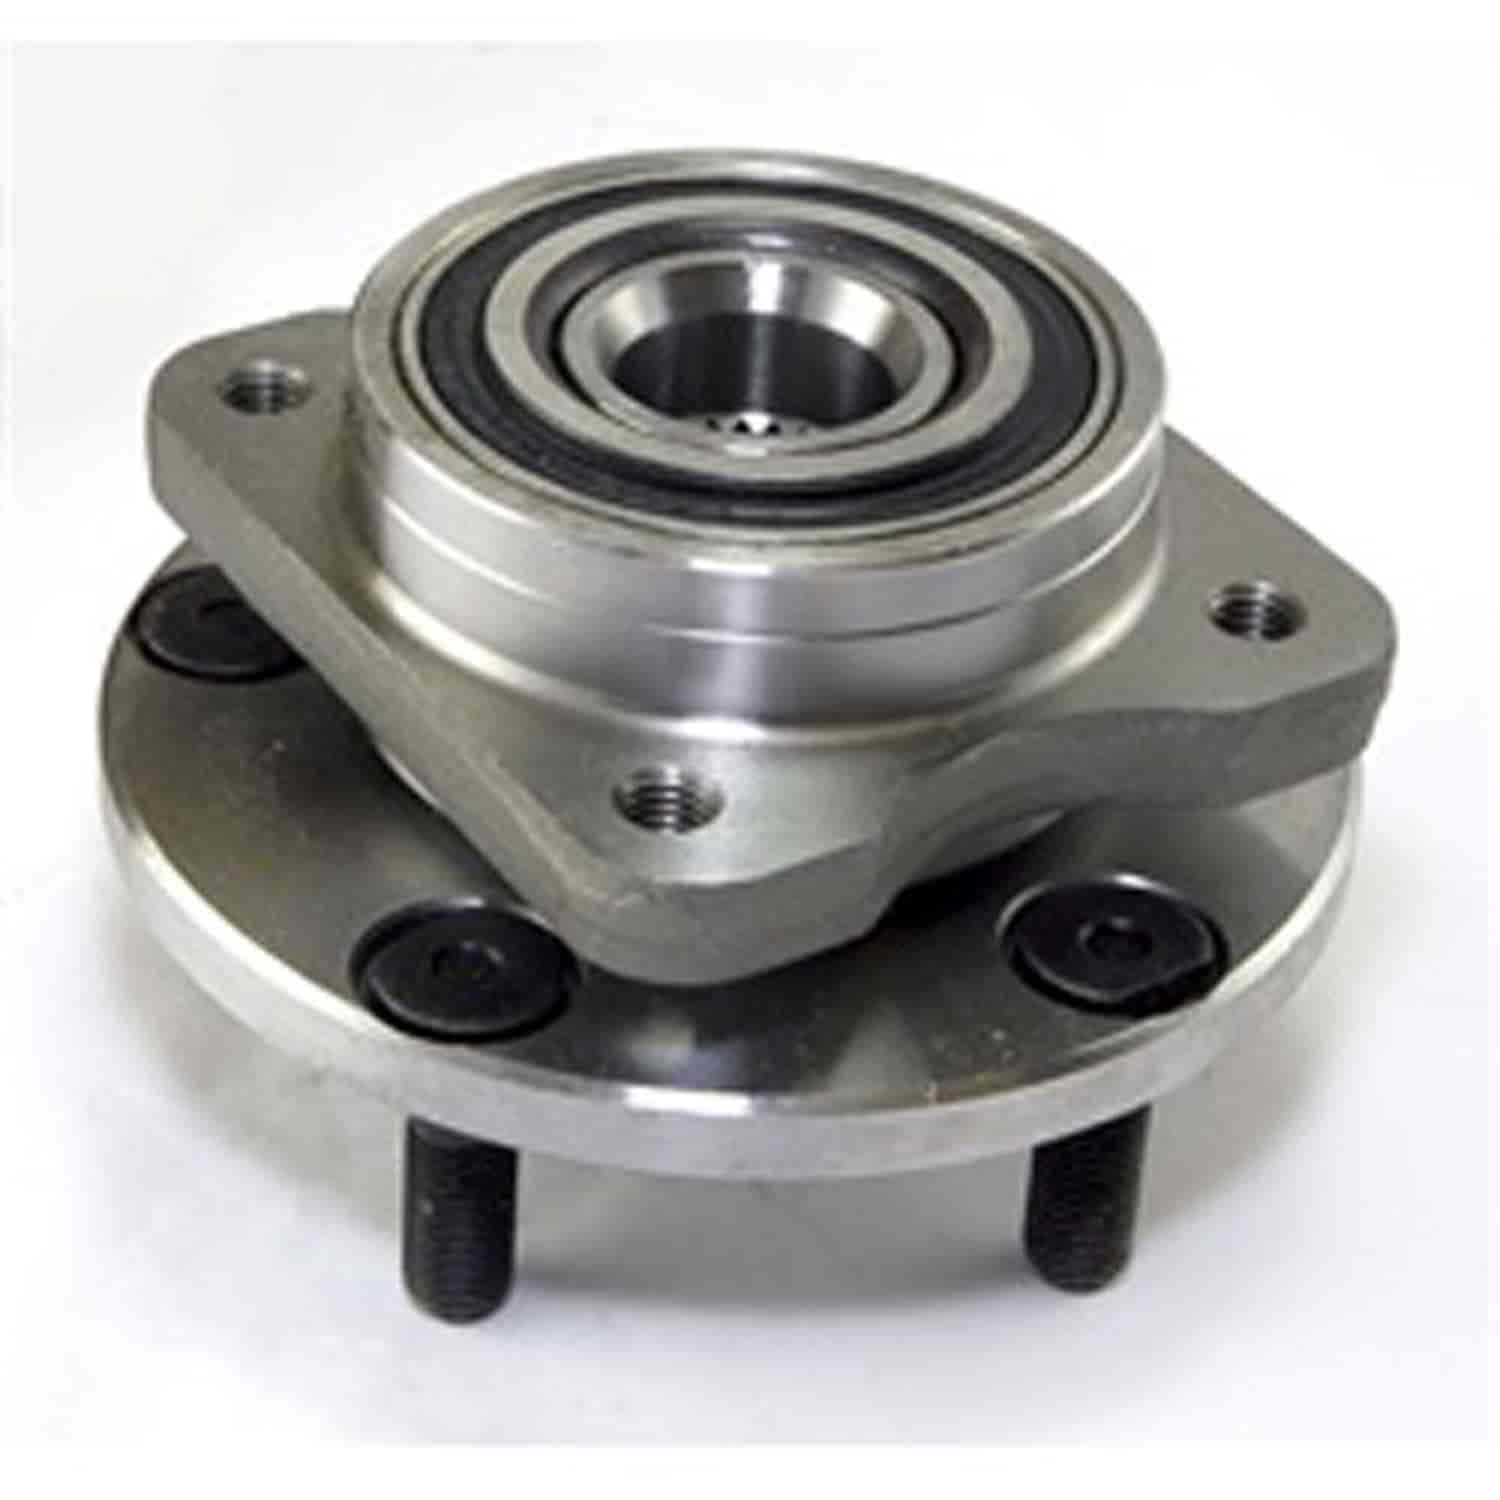 This front axle hub assembly from Omix-ADA fits 92-95 Chrysler minivans with 15 inch wheels and 97-0